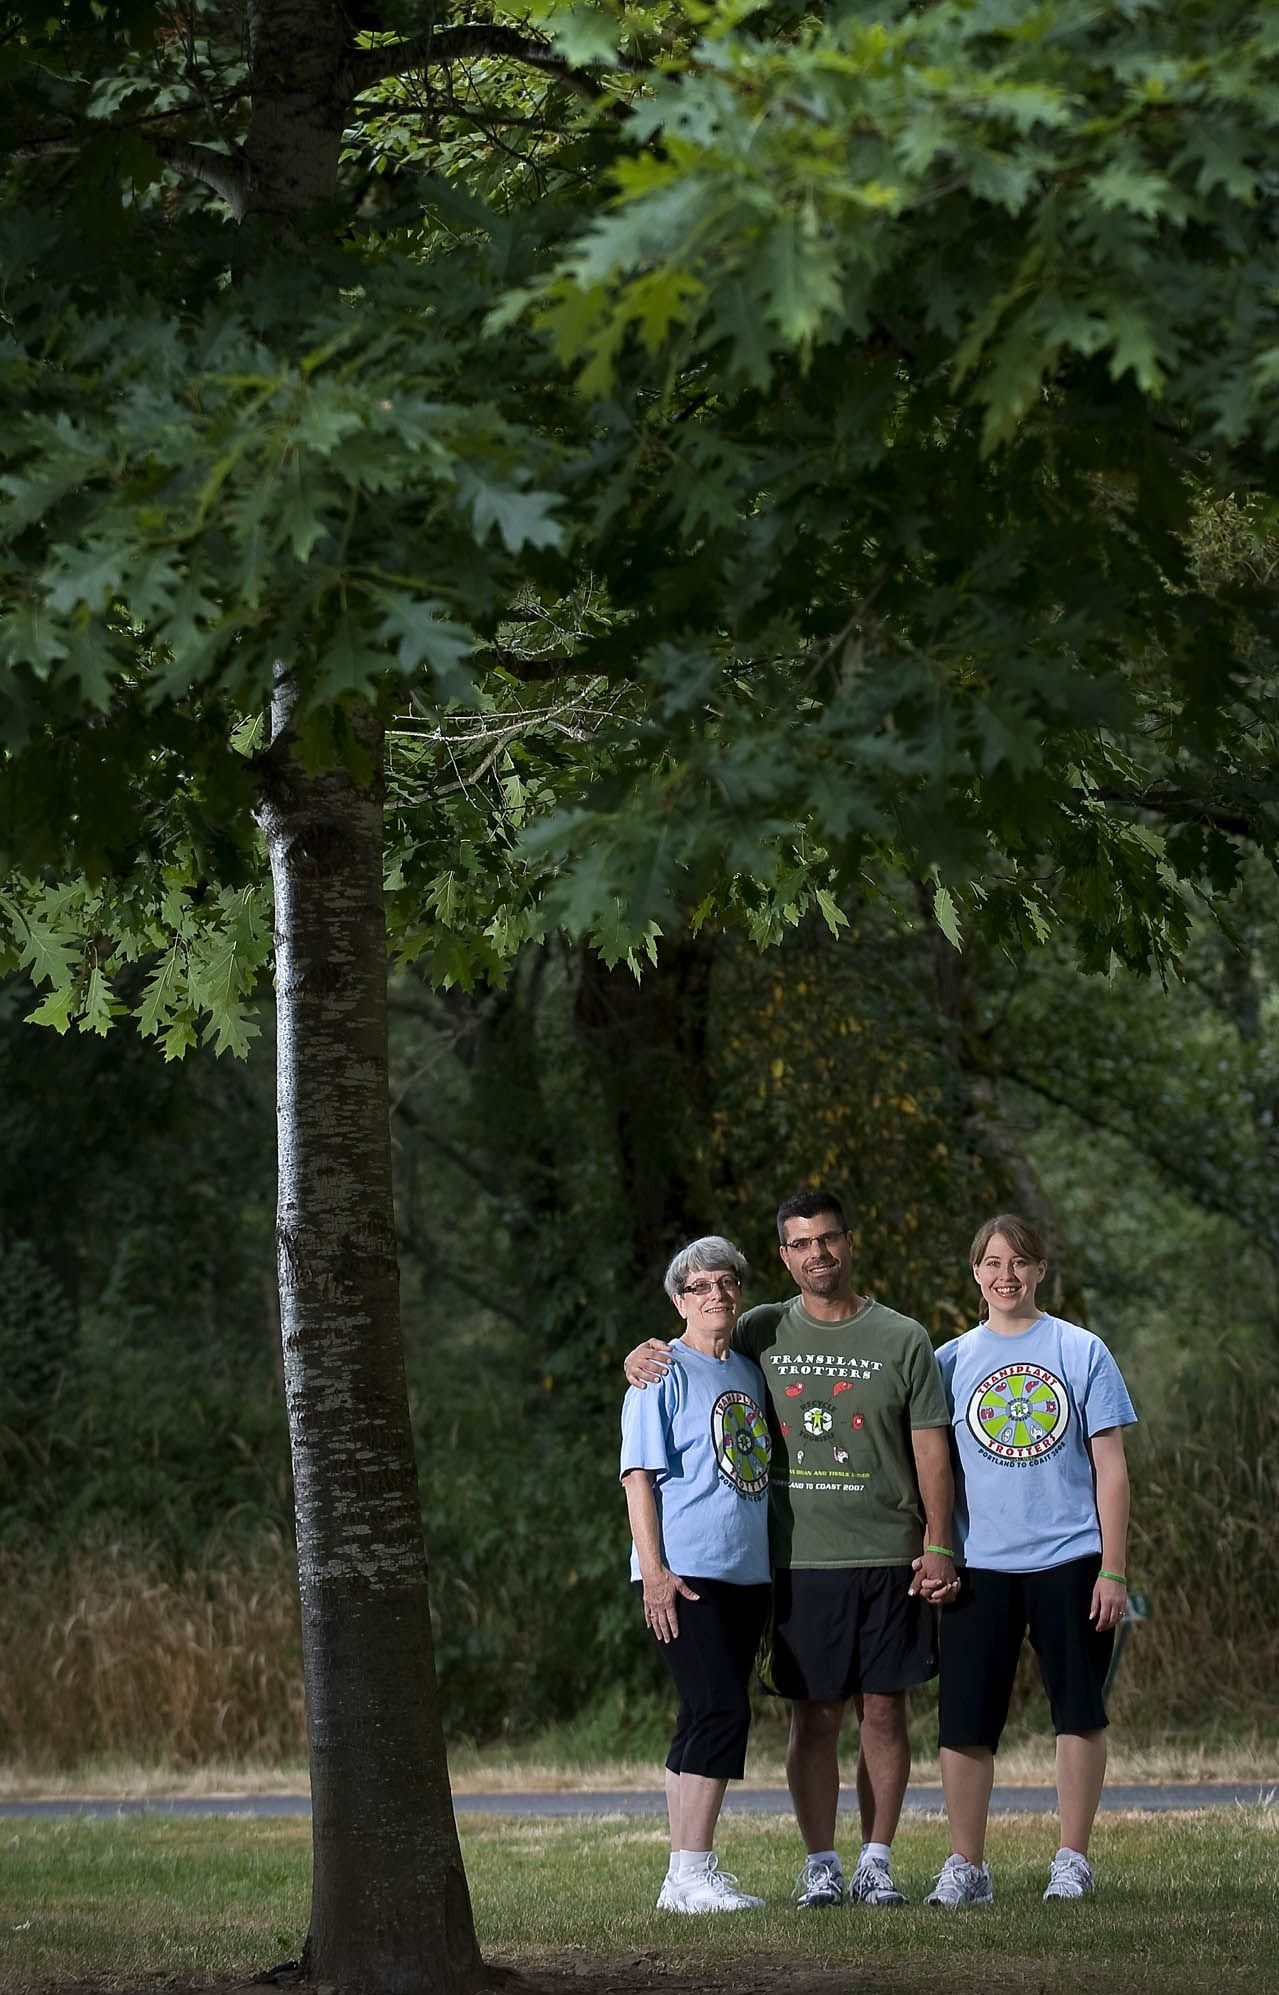 Lee Golden, center, poses for a portrait with his mother, Dolores Golden, left, and his fiancee, Laurie Scheer, on the Salmon Creek Trail near Klineline Pond on Monday. Delores donated a kidney to her son in 2000 after he was diagnosed with kidney disease. Laurie is also a kidney recipient.